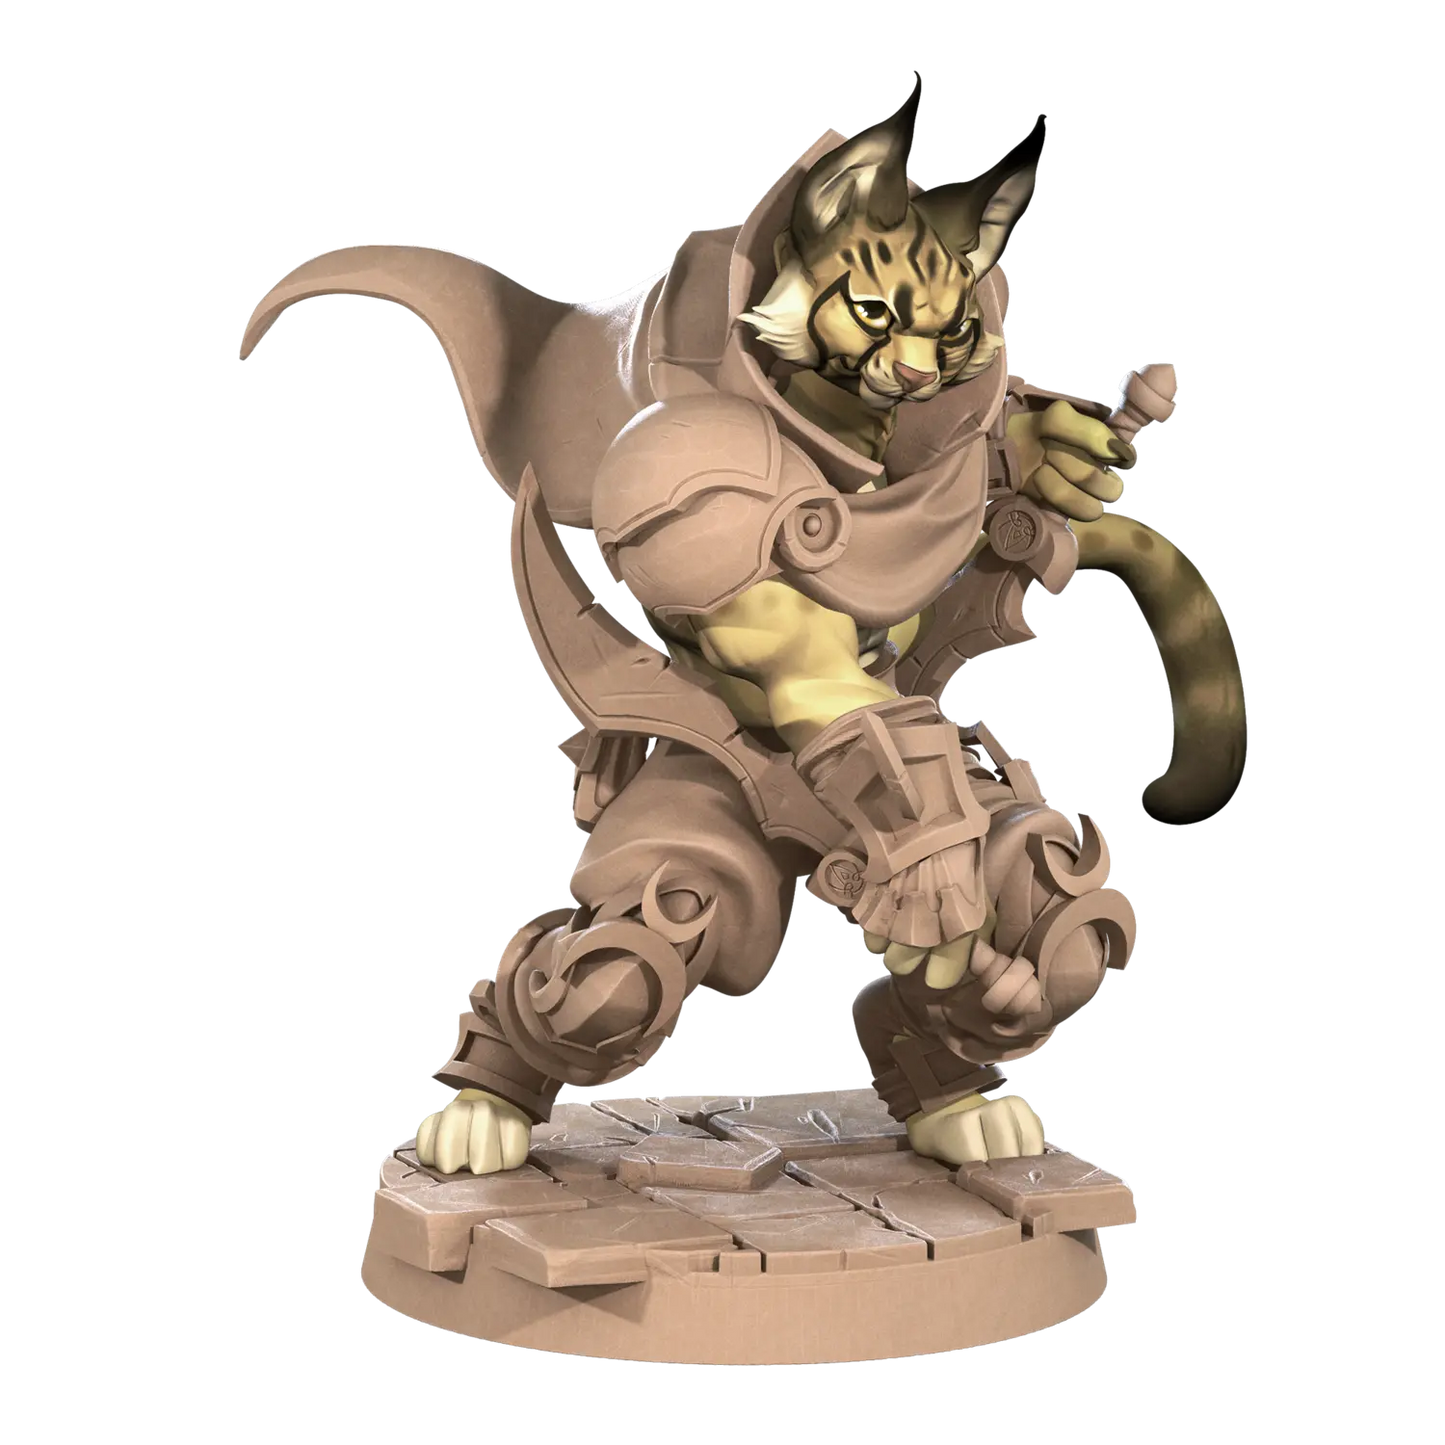 DnD Fighter - Miniature - Monk - Ranger - Rogue - Tabaxi Orion  Fighter - Miniature - Monk - Ranger - Rogue - Tabaxi sold by DoubleHitShop